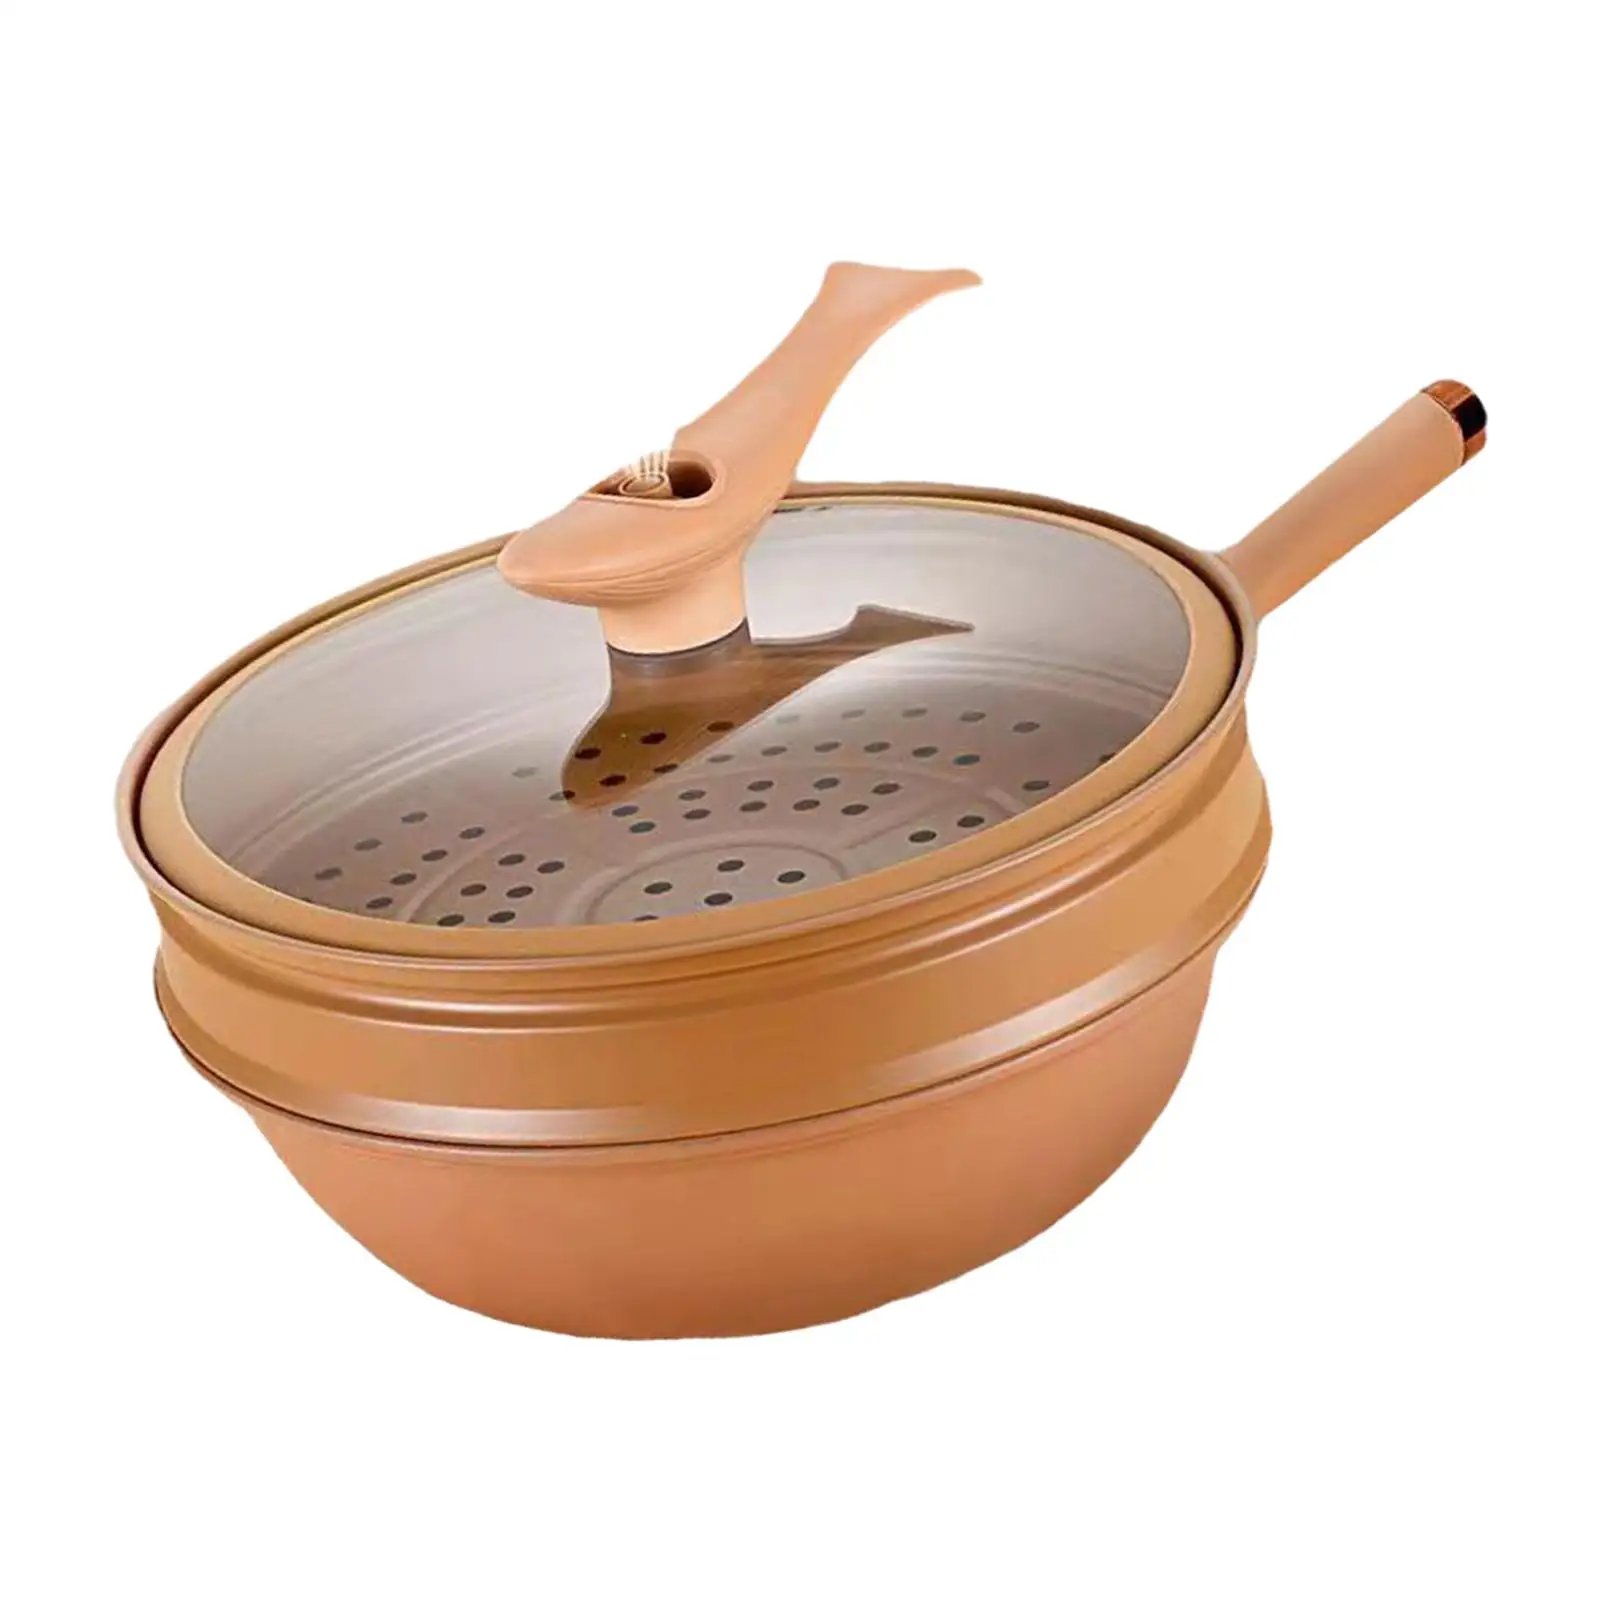 Cooking Pan with Glass Lid and Steamed Grid Light Micro Pressure Wok Nonstick Deep Frying Pan for All Cooktops Fry Steam Boil